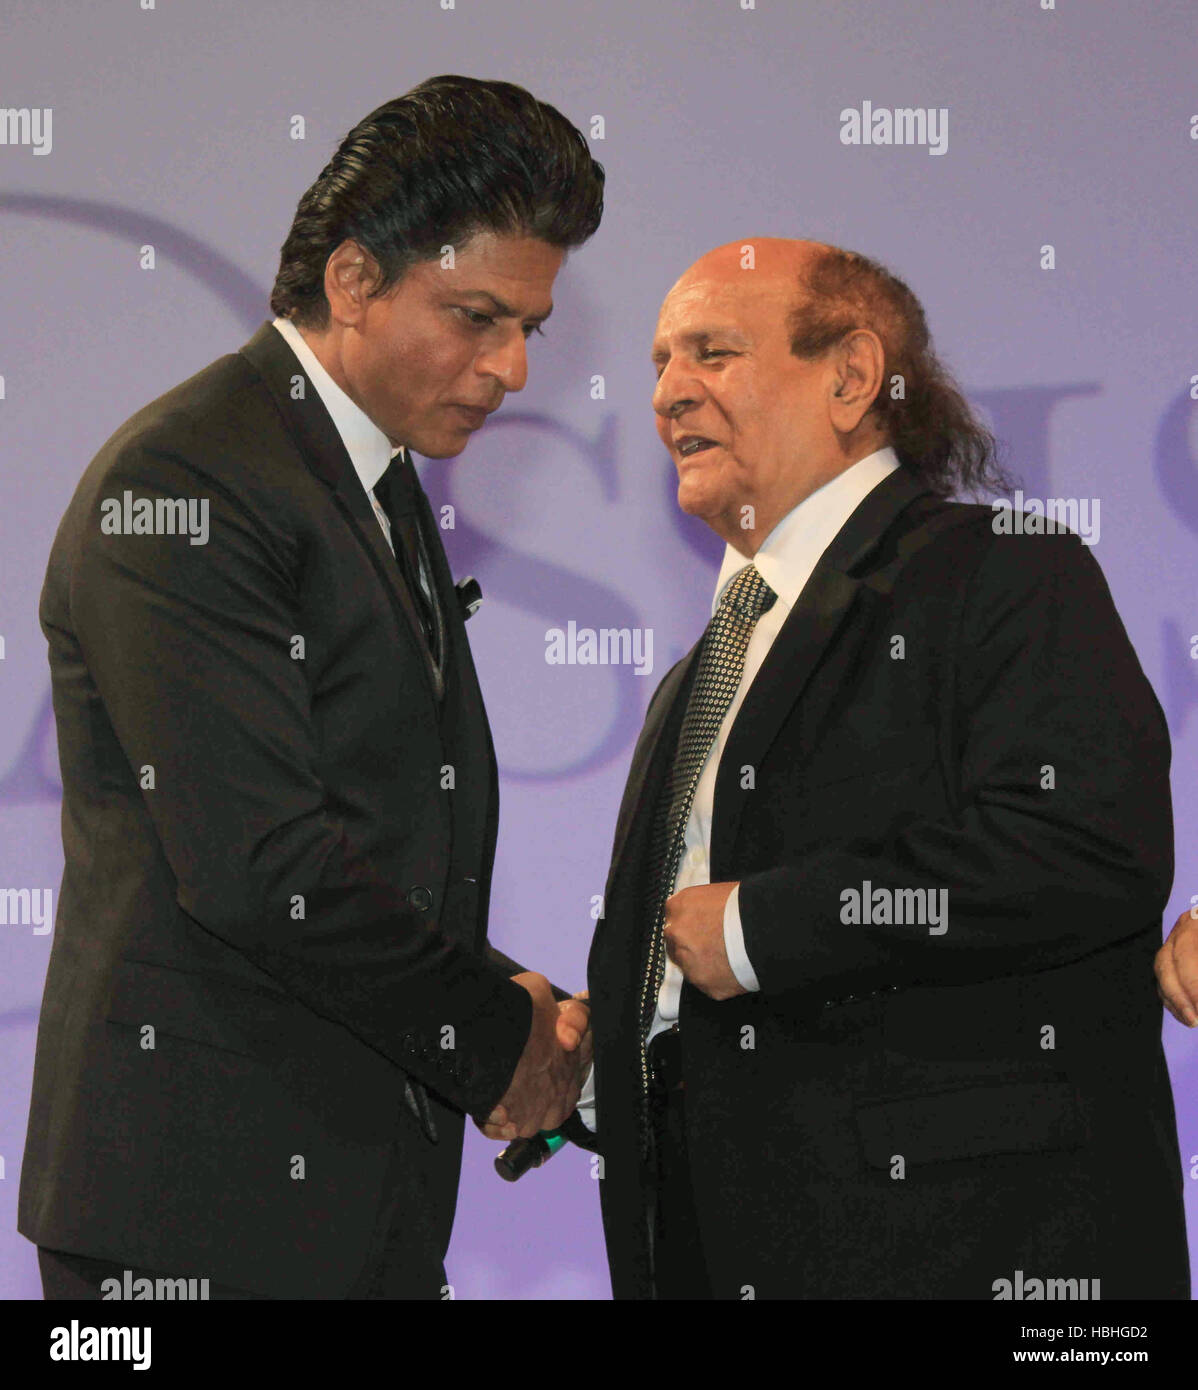 Shah Rukh Khan, Indian Bollywood actor and brand ambassador of D'Decor shaking hands with V K Arora, Chairman of  D'Decor Mumbai India Stock Photo